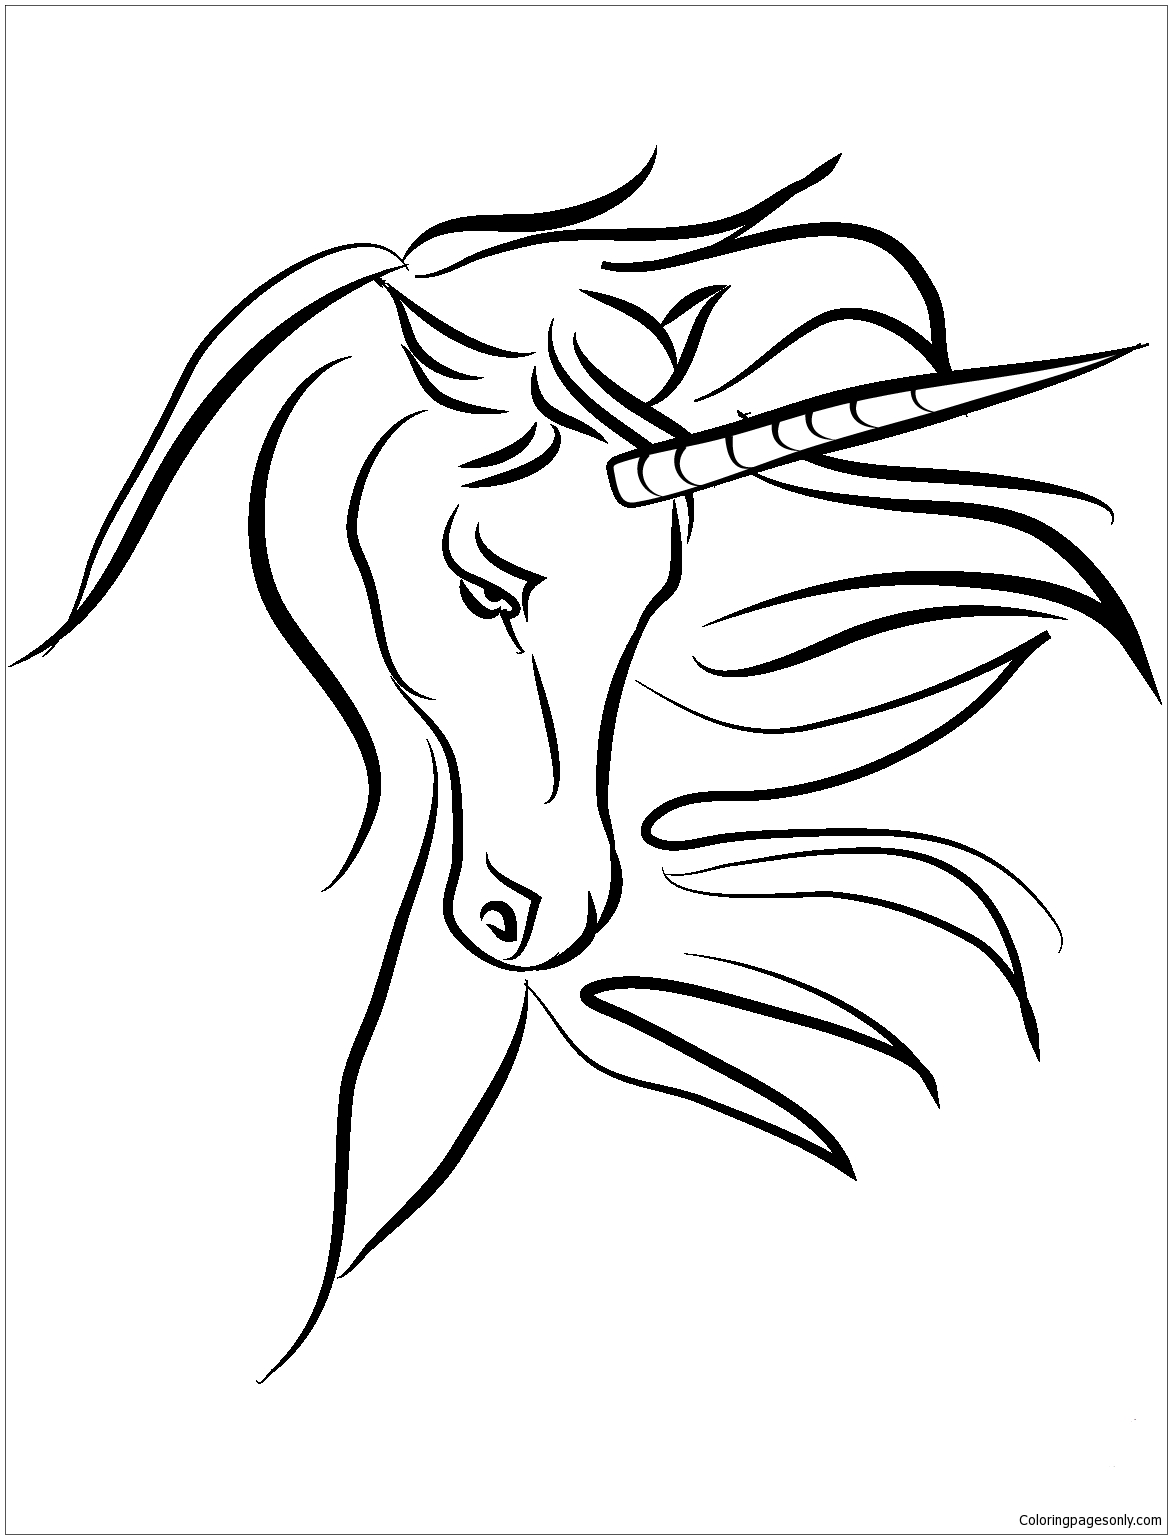 Beautiful Unicorn 2 Coloring Page - Free Coloring Pages Online